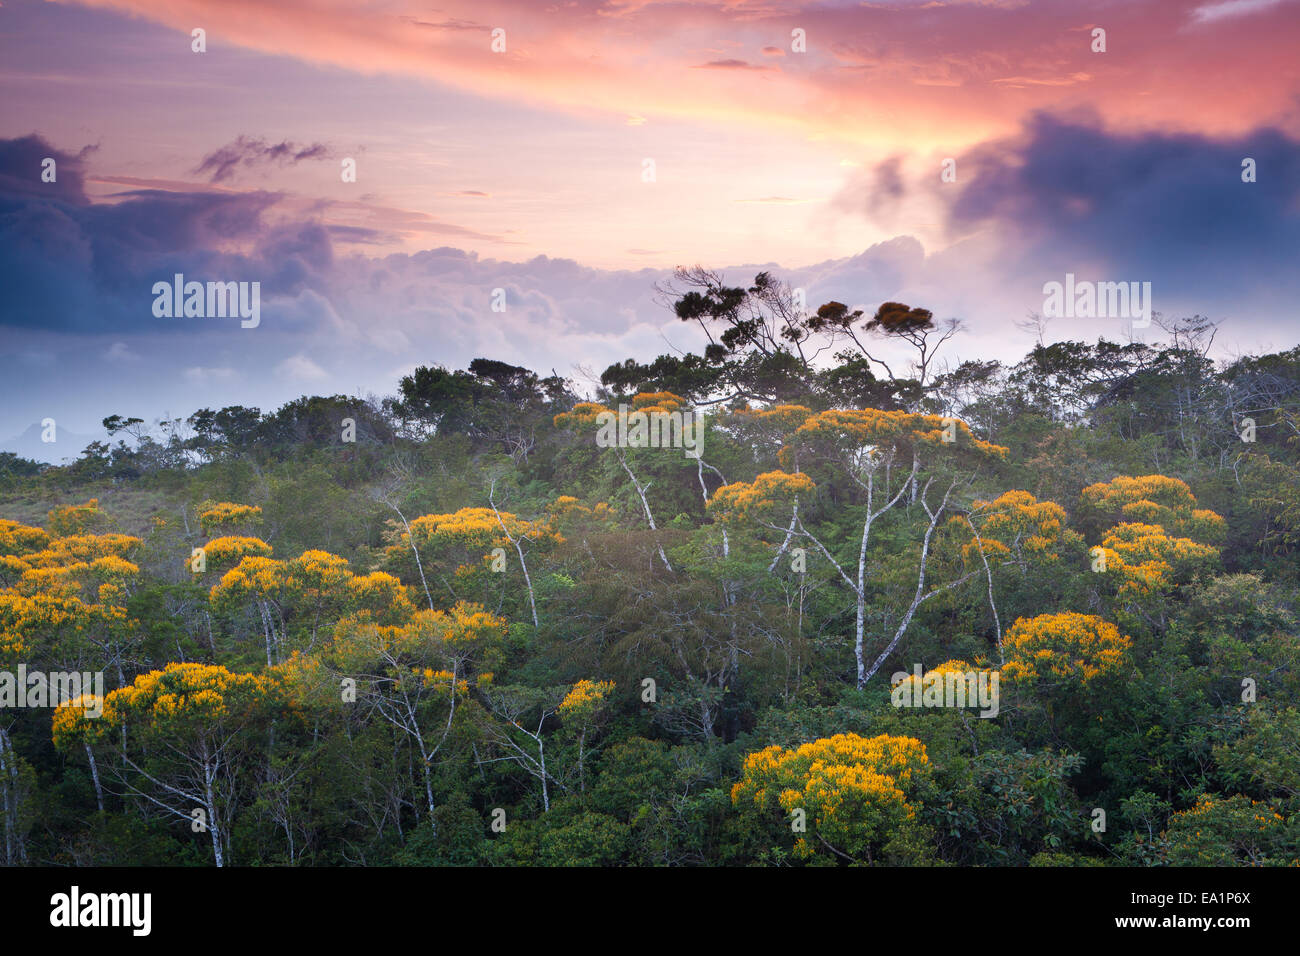 Flowering May Trees at sunset in Altos de Campana national park, Panama province, Pacific slope, Republic of Panama. Stock Photo